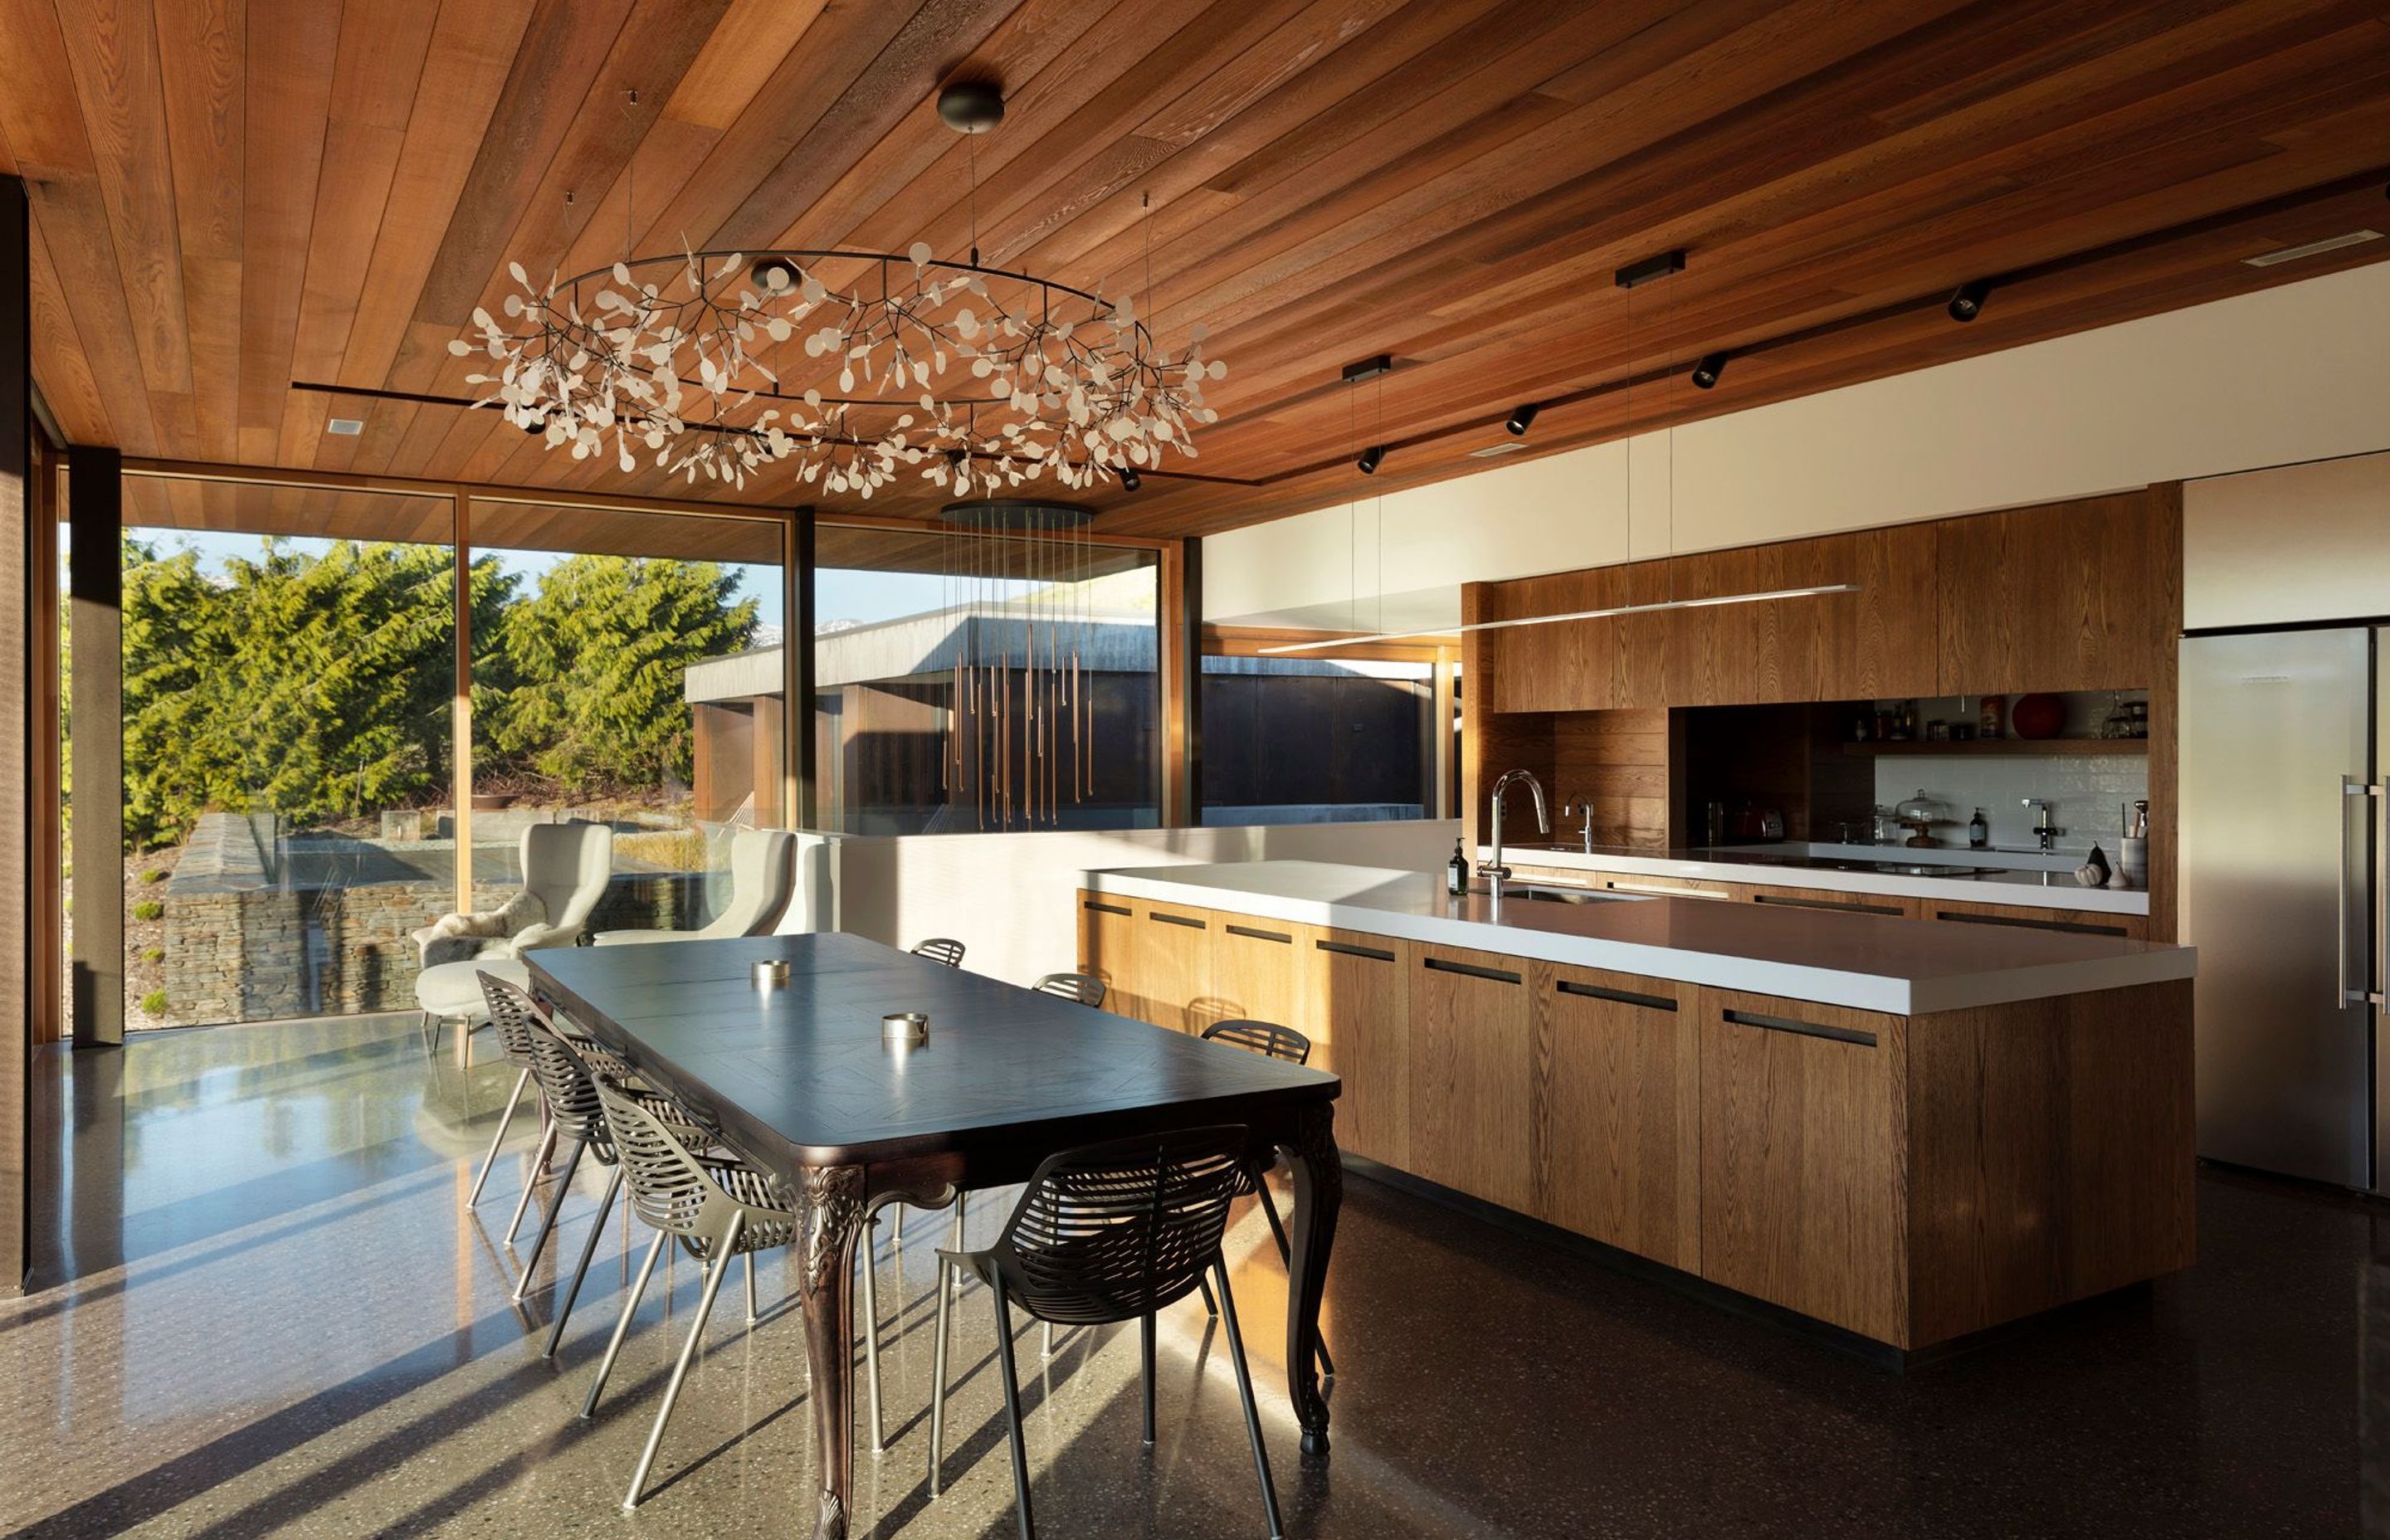 The kitchen and dining area features a cedar-panelled ceiling and oak cabinetry, providing a warm contrast to the polished concrete floor and stainless steel appliances.